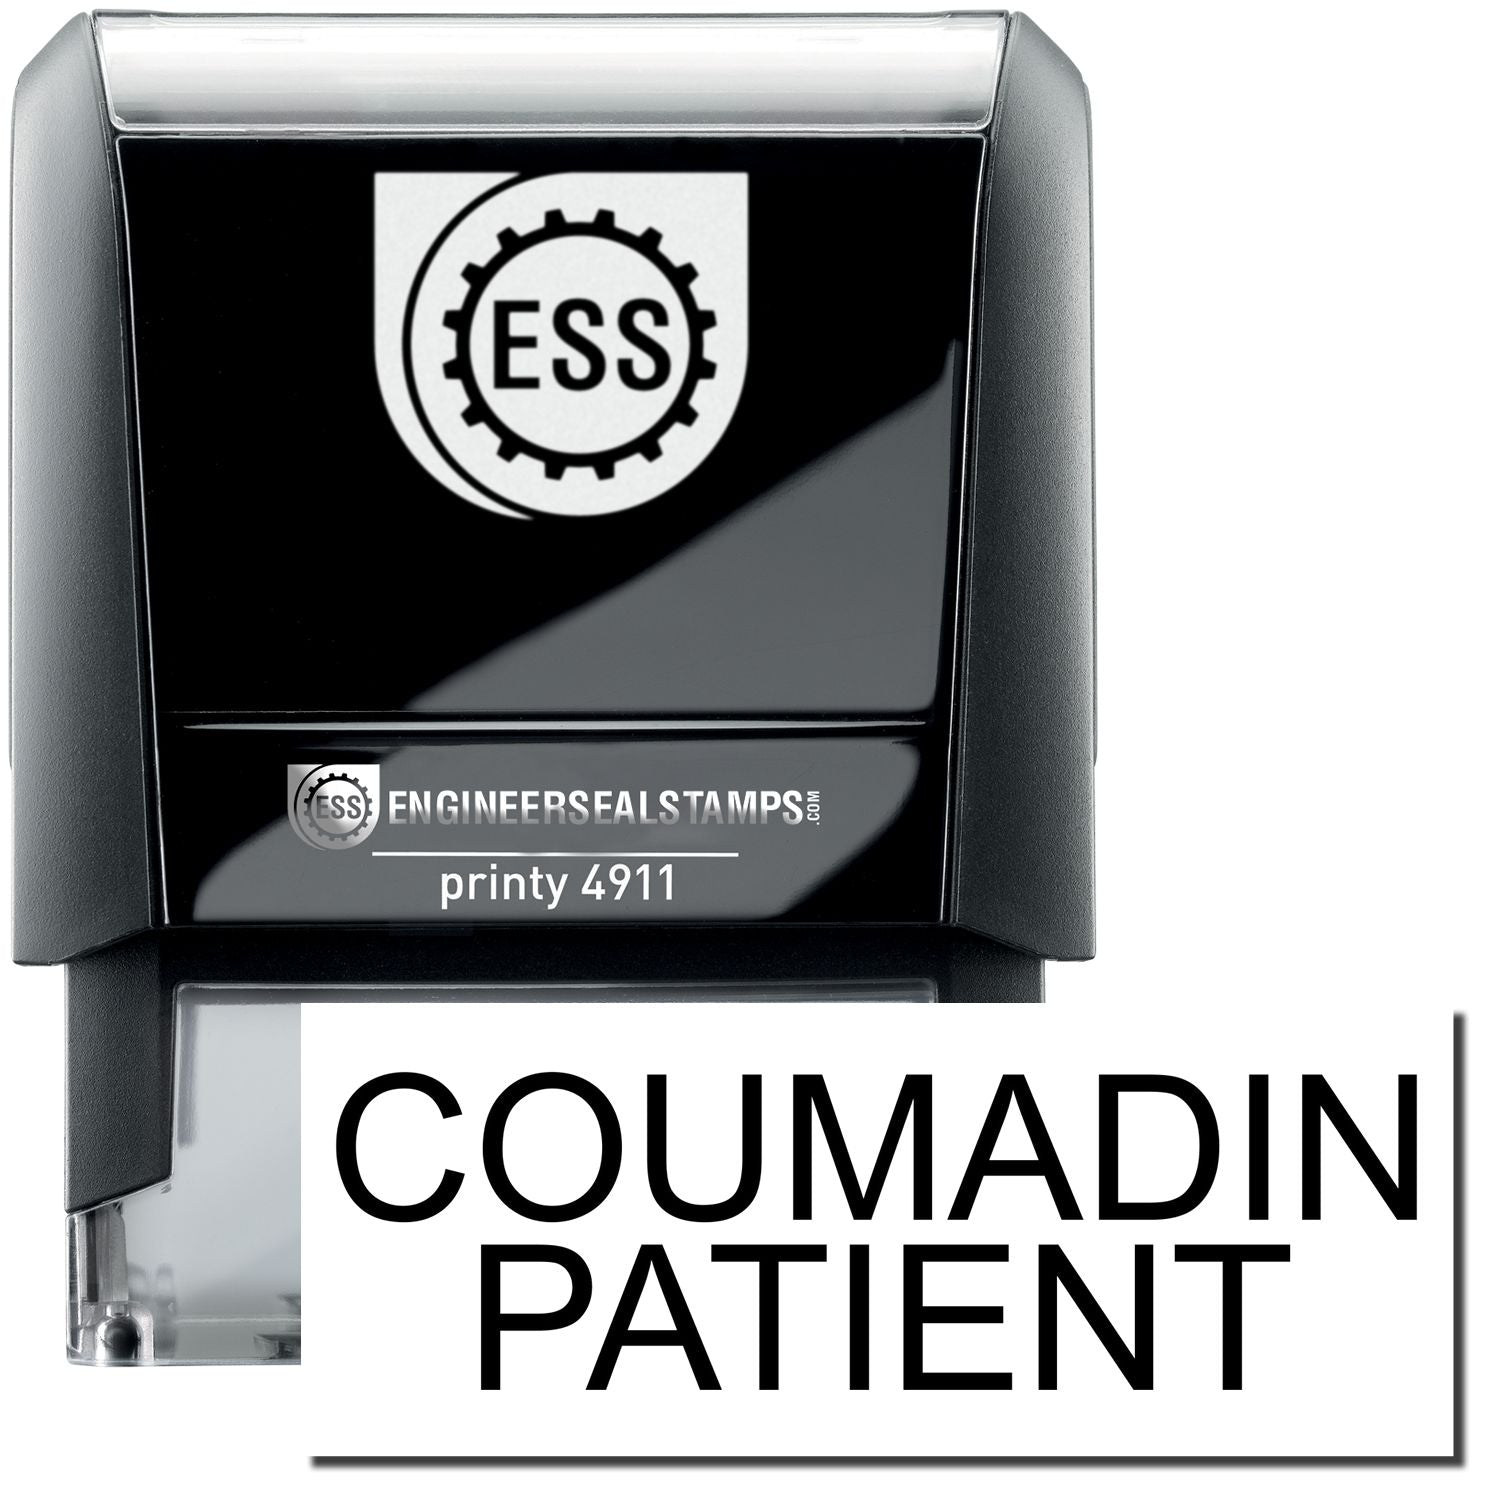 A self-inking stamp with a stamped image showing how the text "COUMADIN PATIENT" is displayed after stamping.